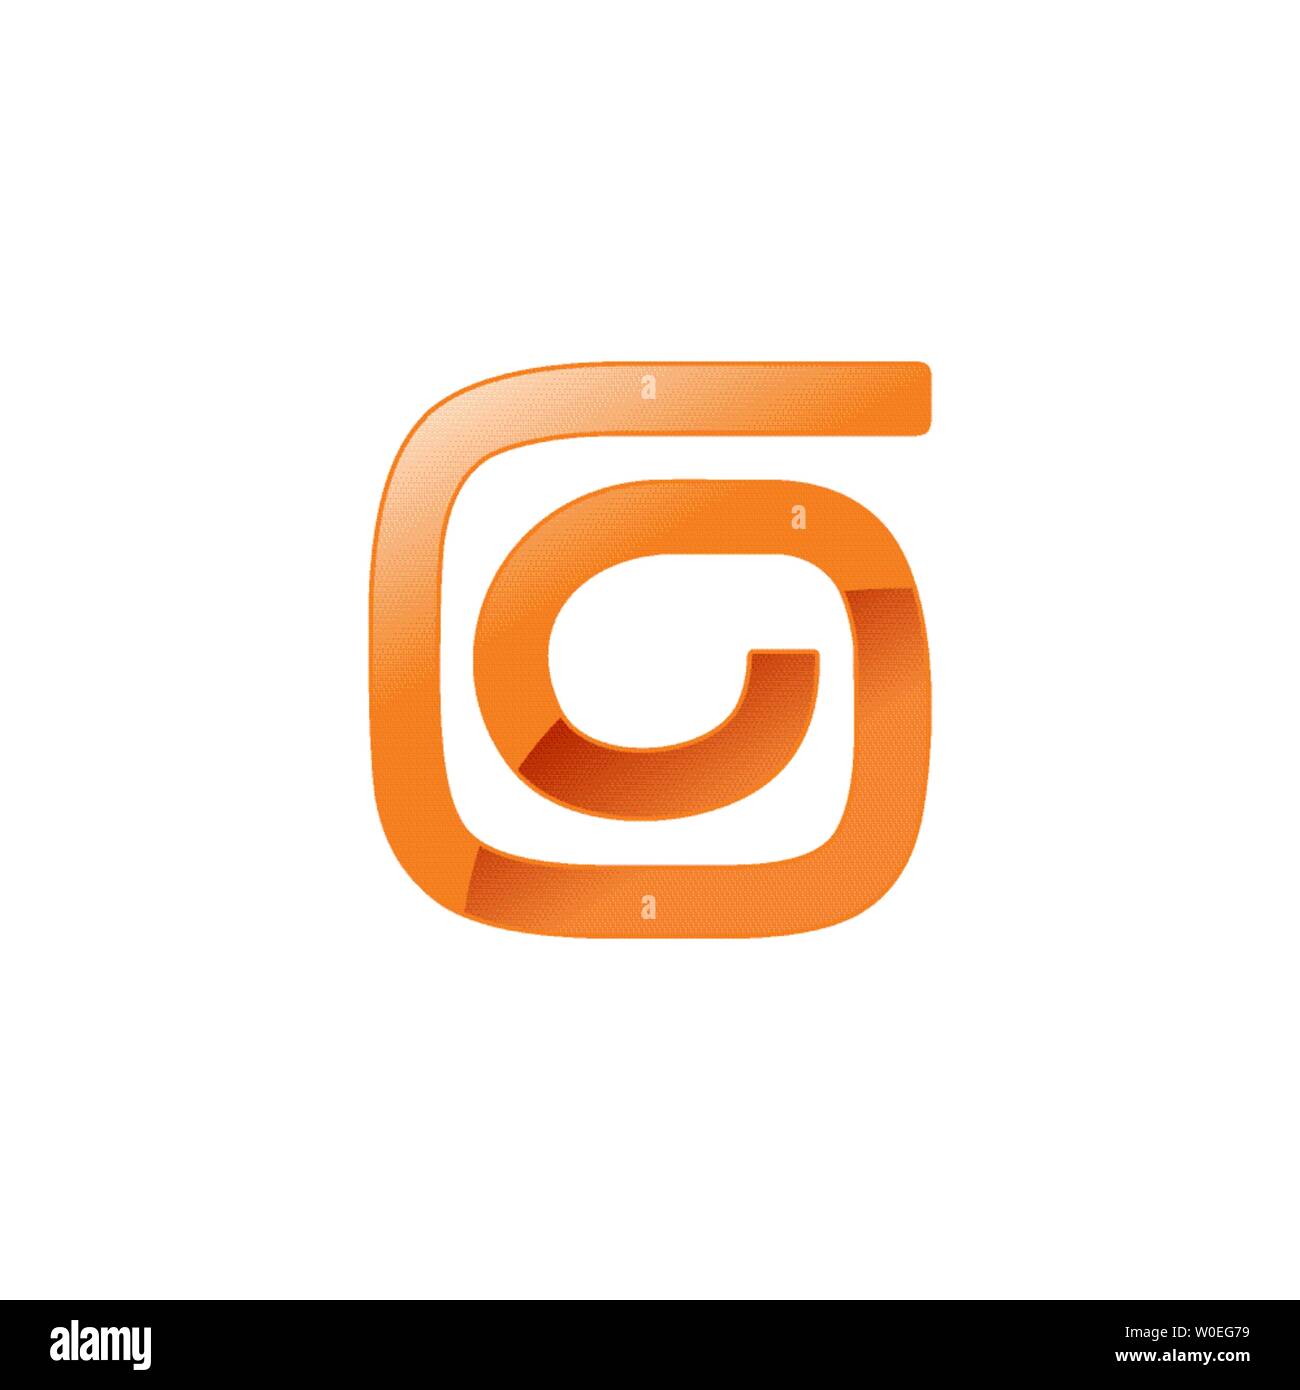 Abstract Spiral Form Letter G Shape Vector Symbol Graphic Logo Design Template Stock Vector